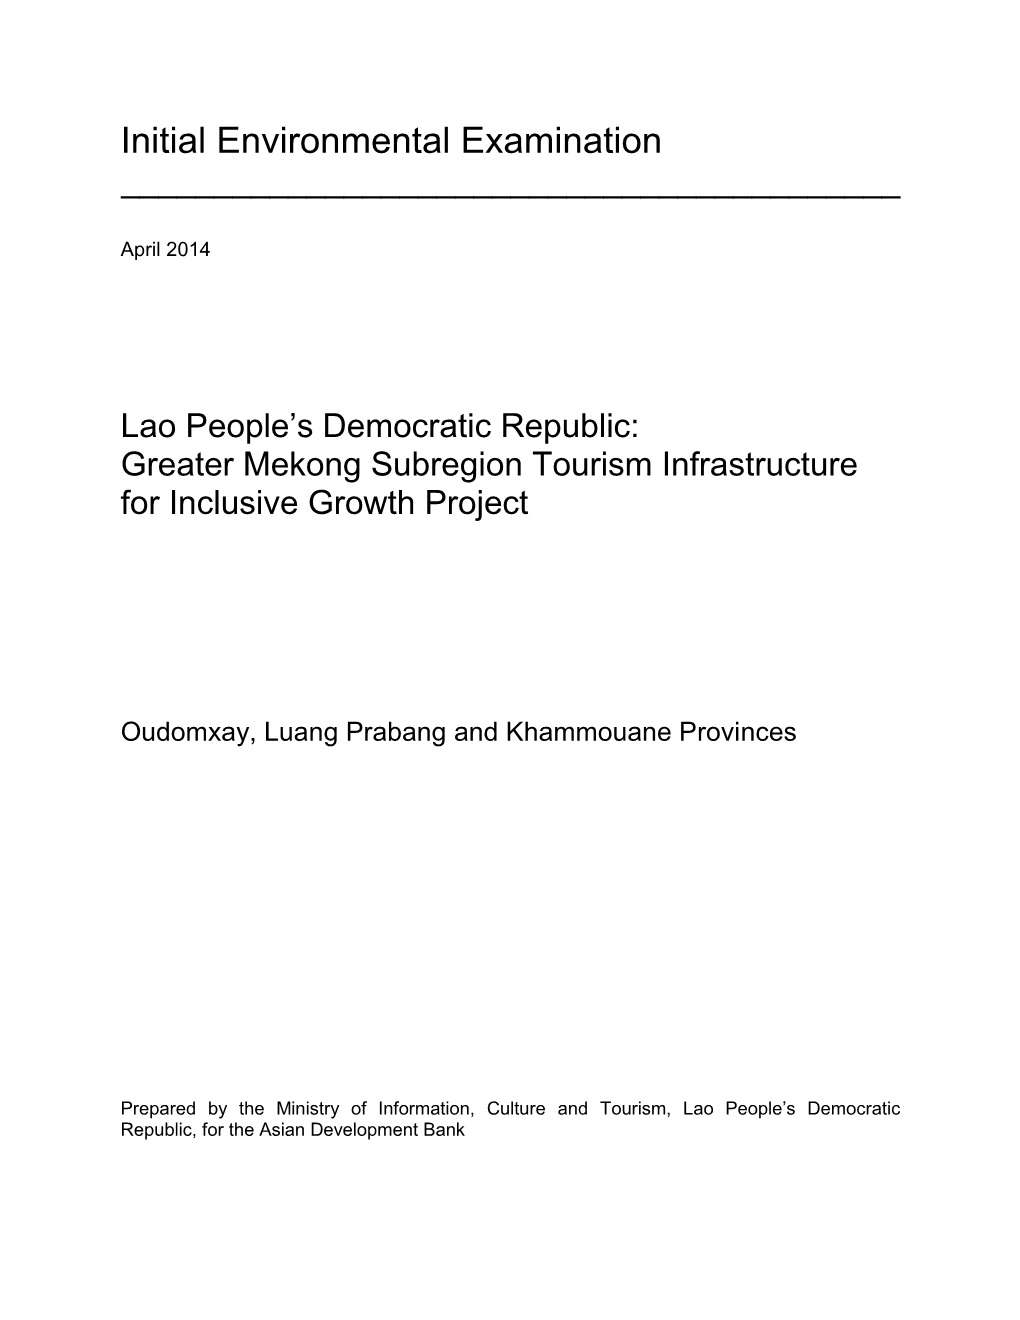 Lao People’S Democratic Republic: Greater Mekong Subregion Tourism Infrastructure for Inclusive Growth Project